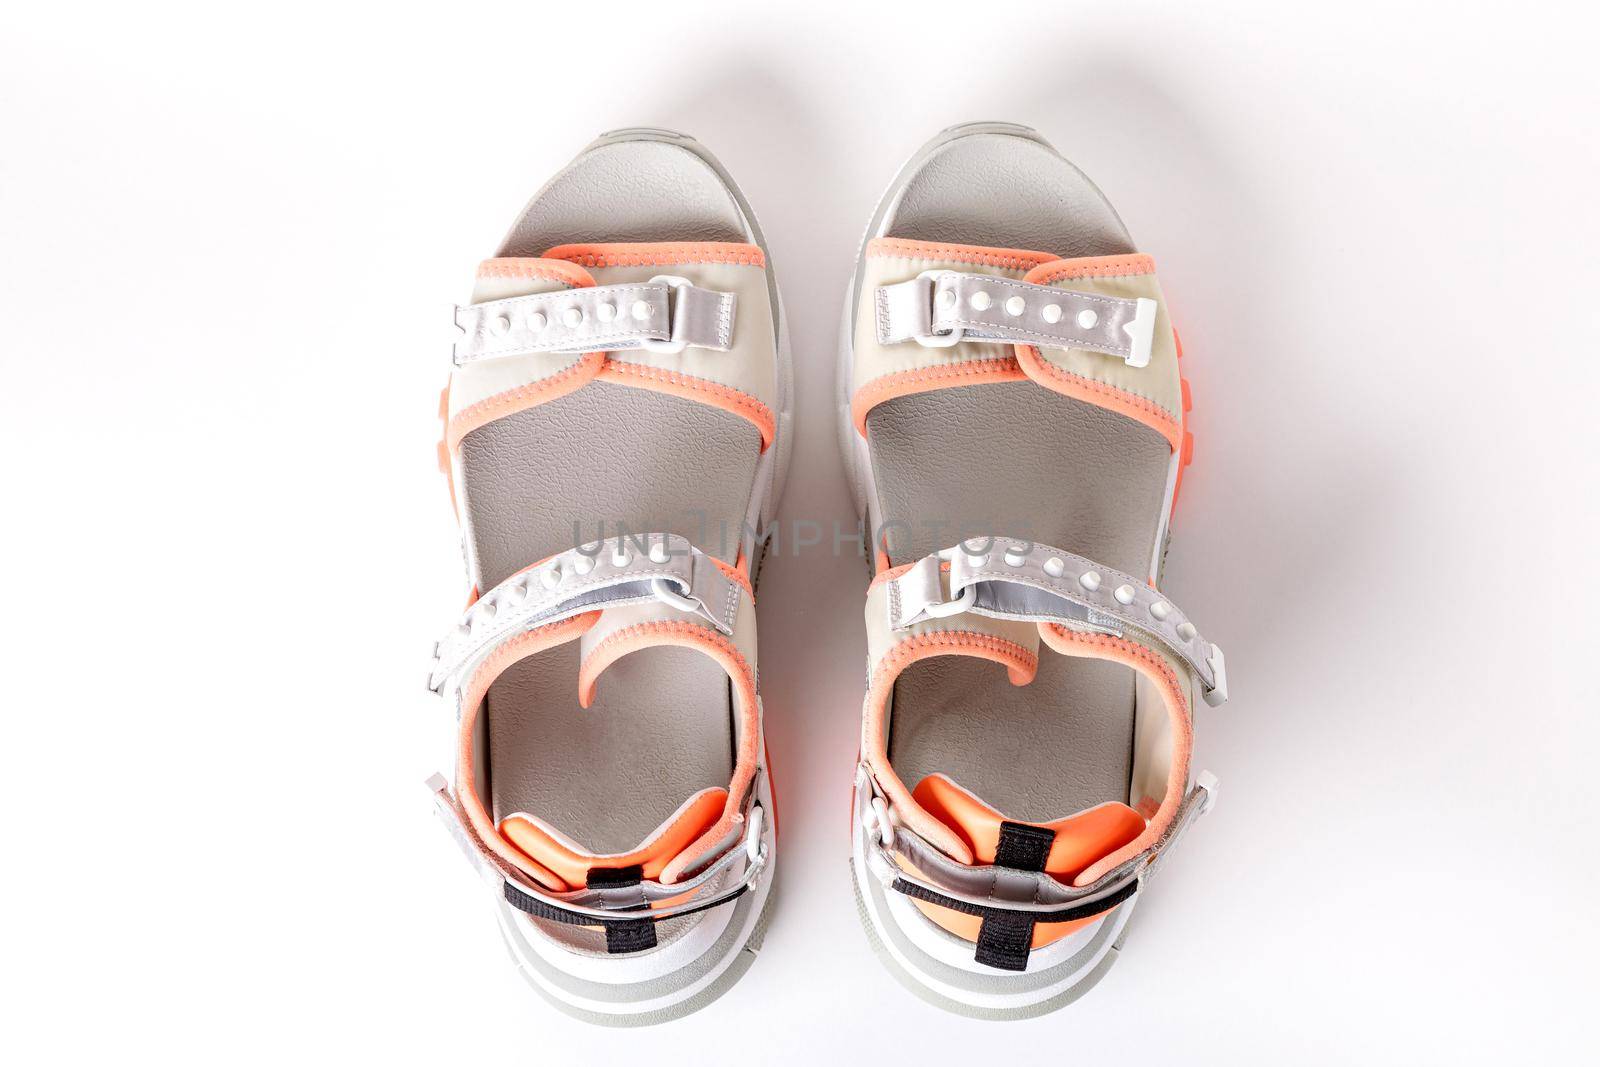 Women's, fashionable, sports sandals with orange accents on a white background. by Yurich32